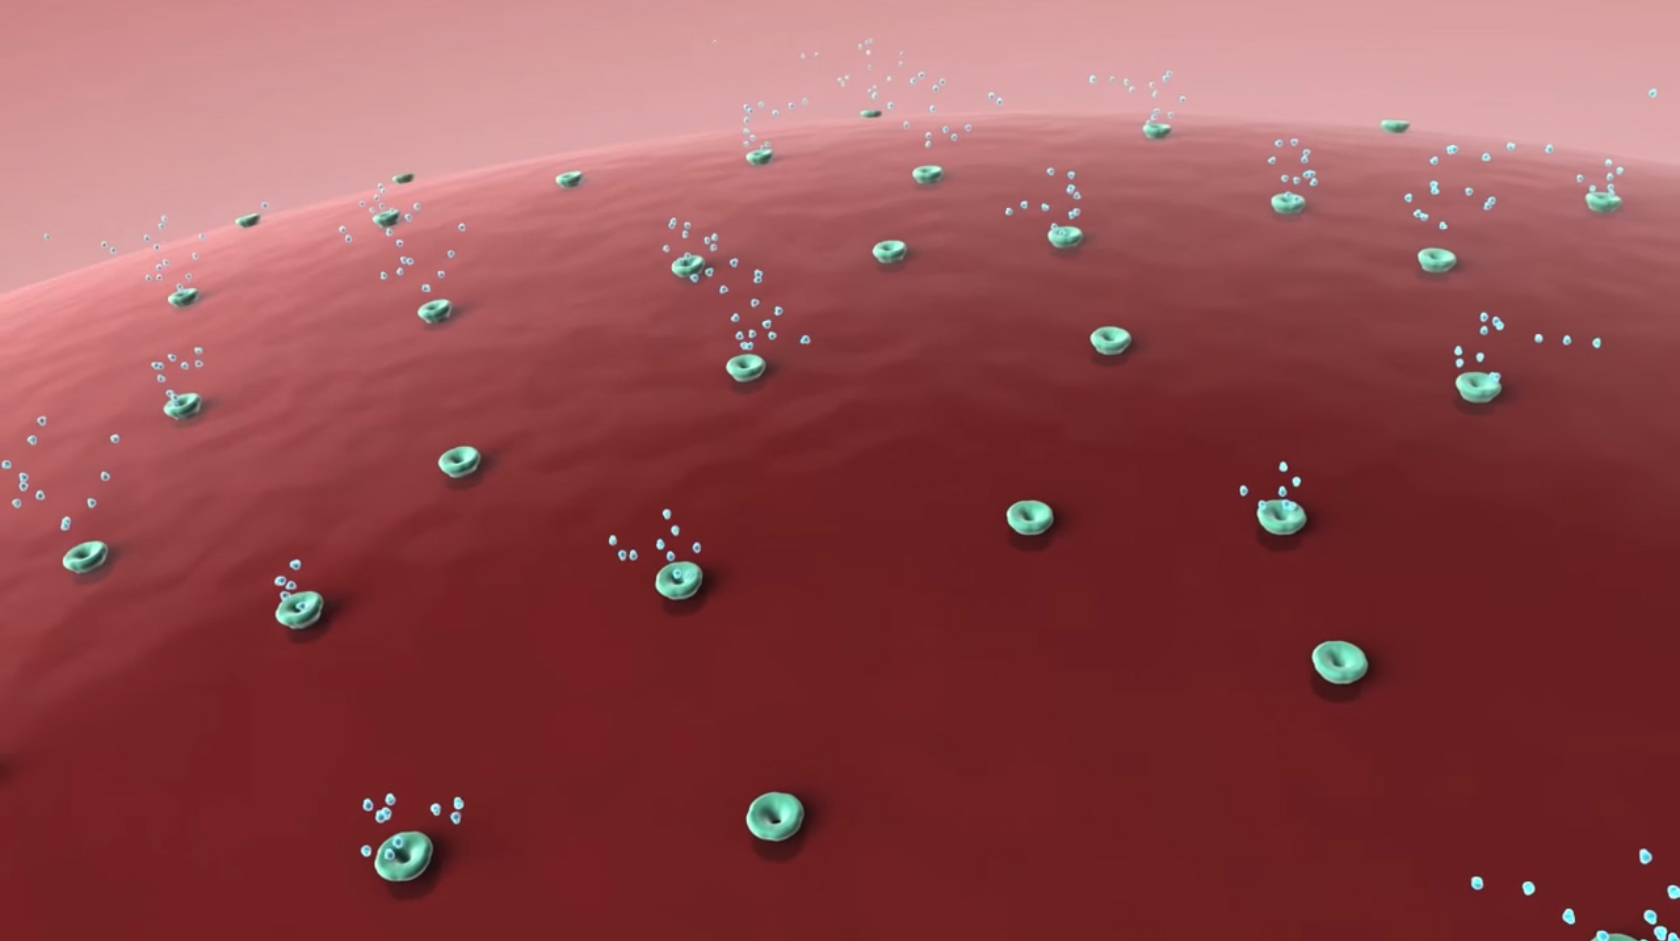 Plate From 3D Animation Showing Activity Of Aquaporins